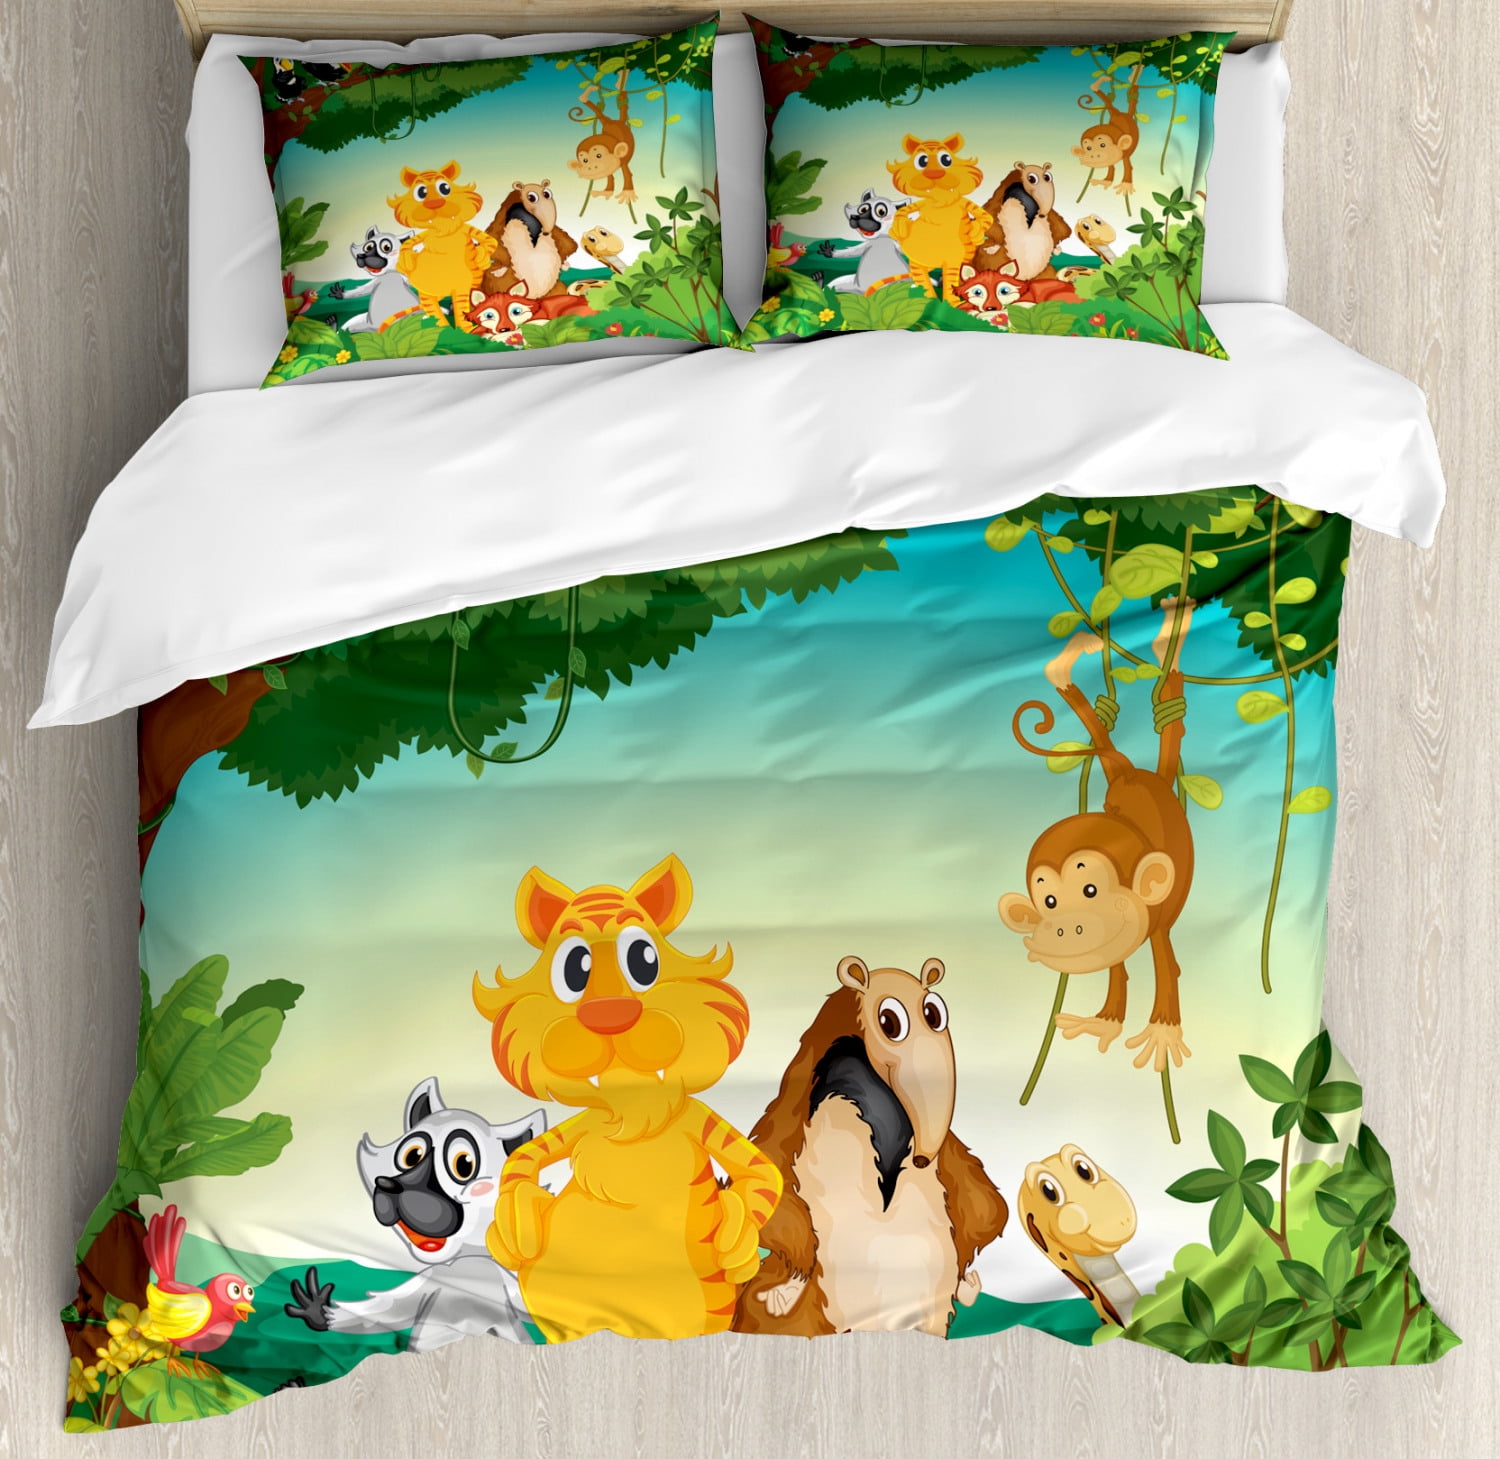 Ambesonne Educational Bedspread Green Yellow Zoo Alphabet Design Colorful Style Funny Cartoon Animals Children Kids School Twin Size Decorative Quilted 2 Piece Coverlet Set with Pillow Sham